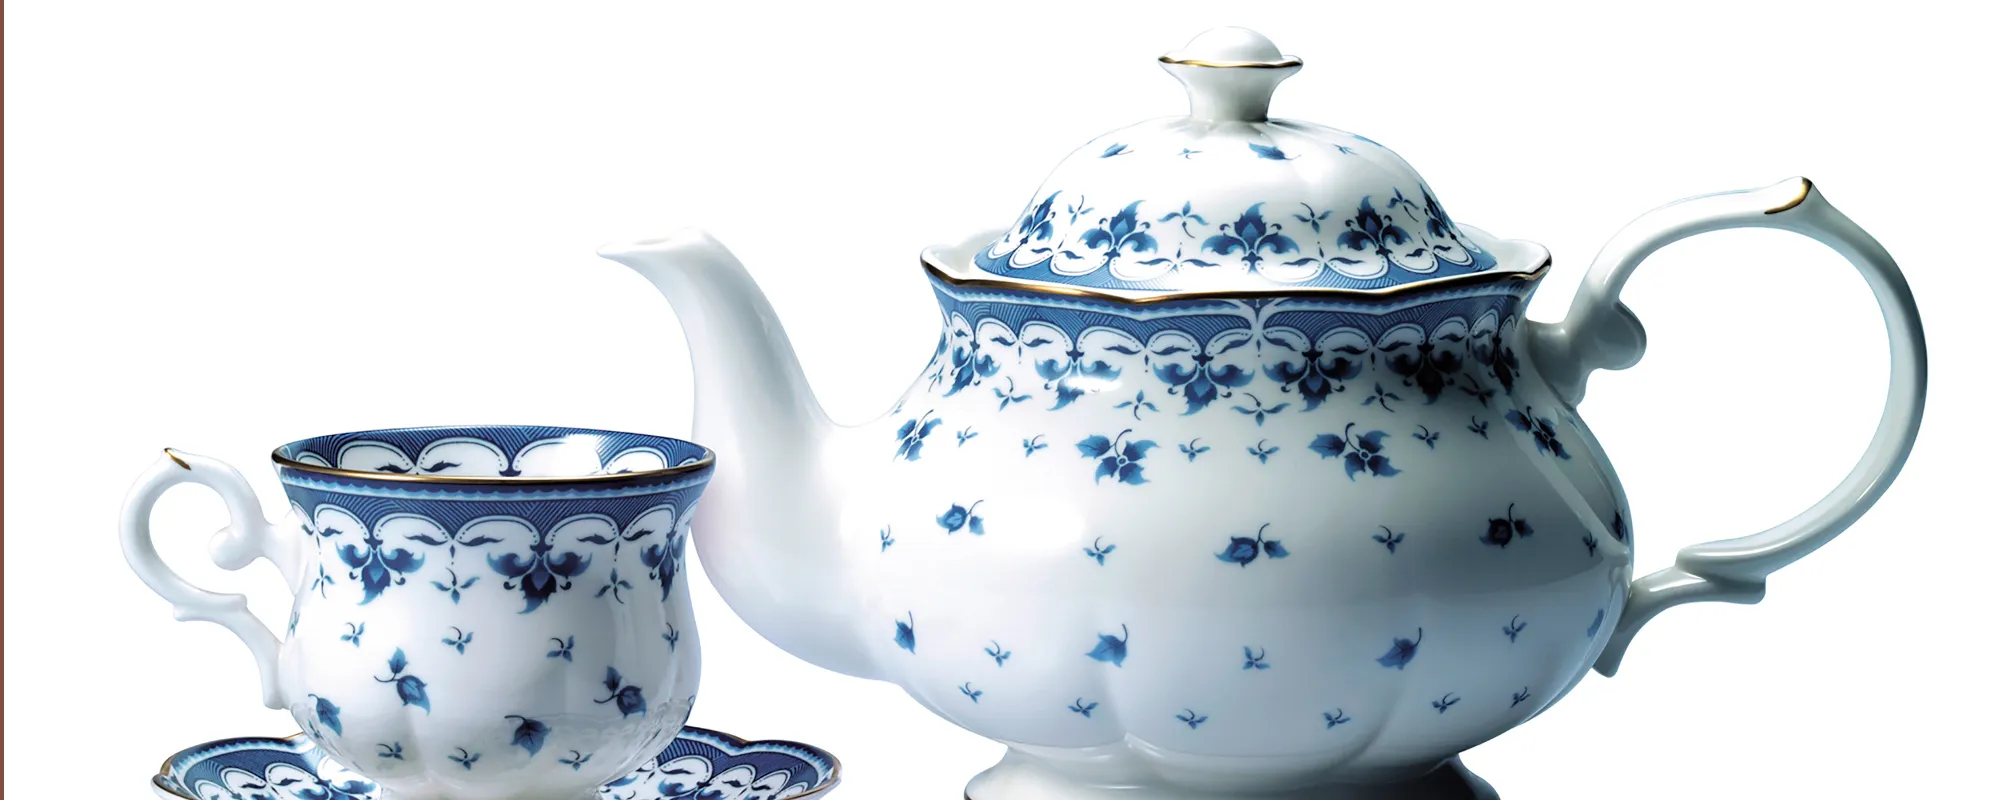 Who Wrote the Iconic and So-Called “Inane” Nursery Rhyme, “I’m a Little Teapot”?